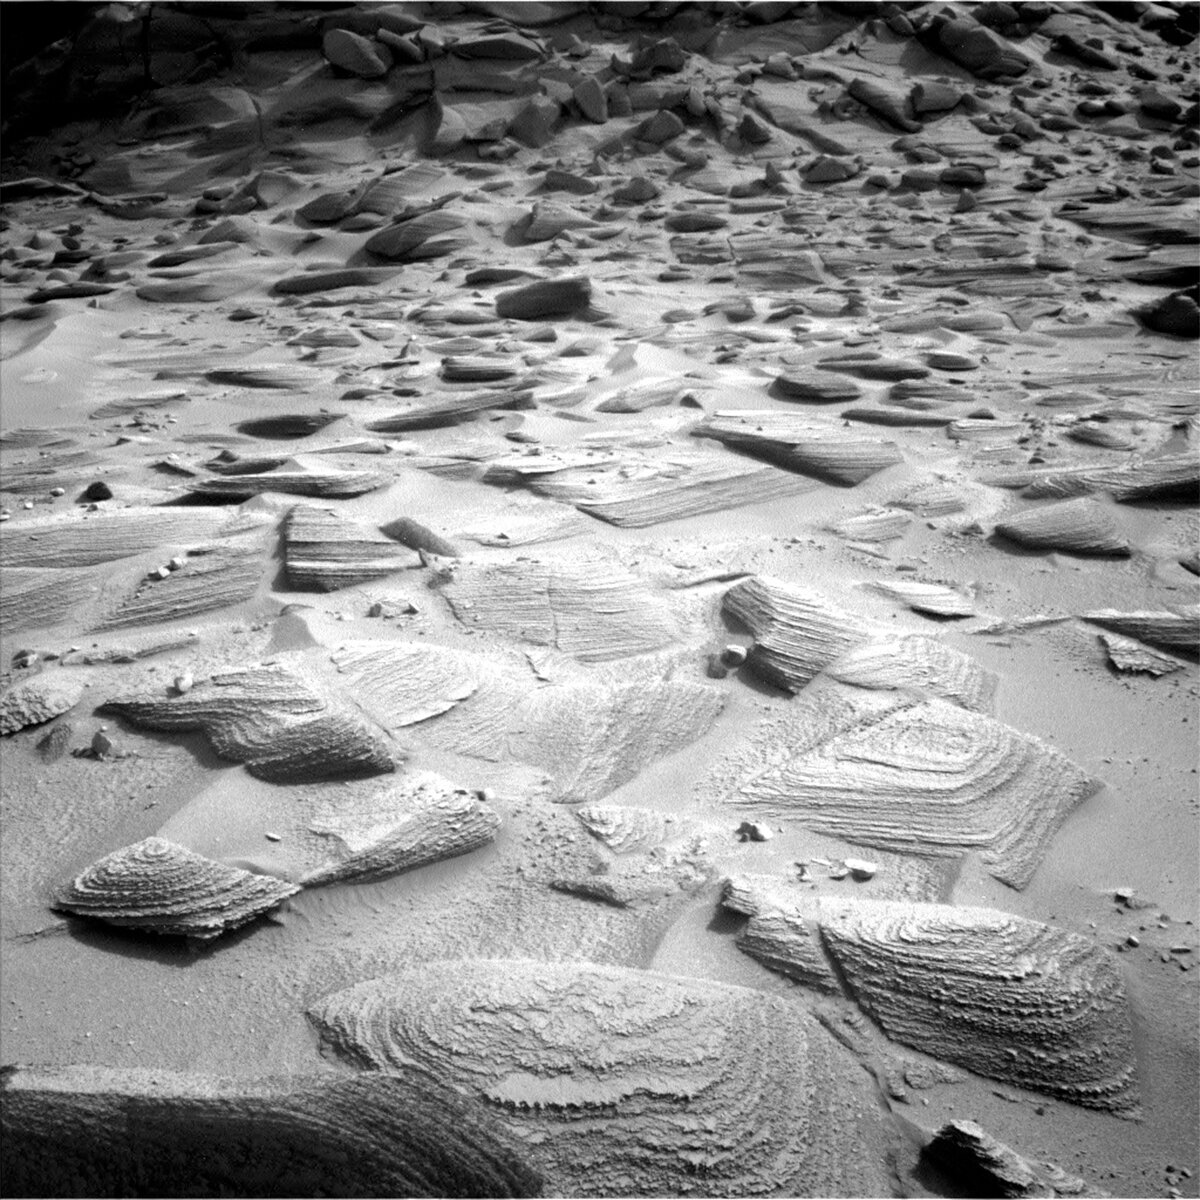 This image of rock formations on the Martian surface in grayscale was taken by Curiosity on sol 3778.